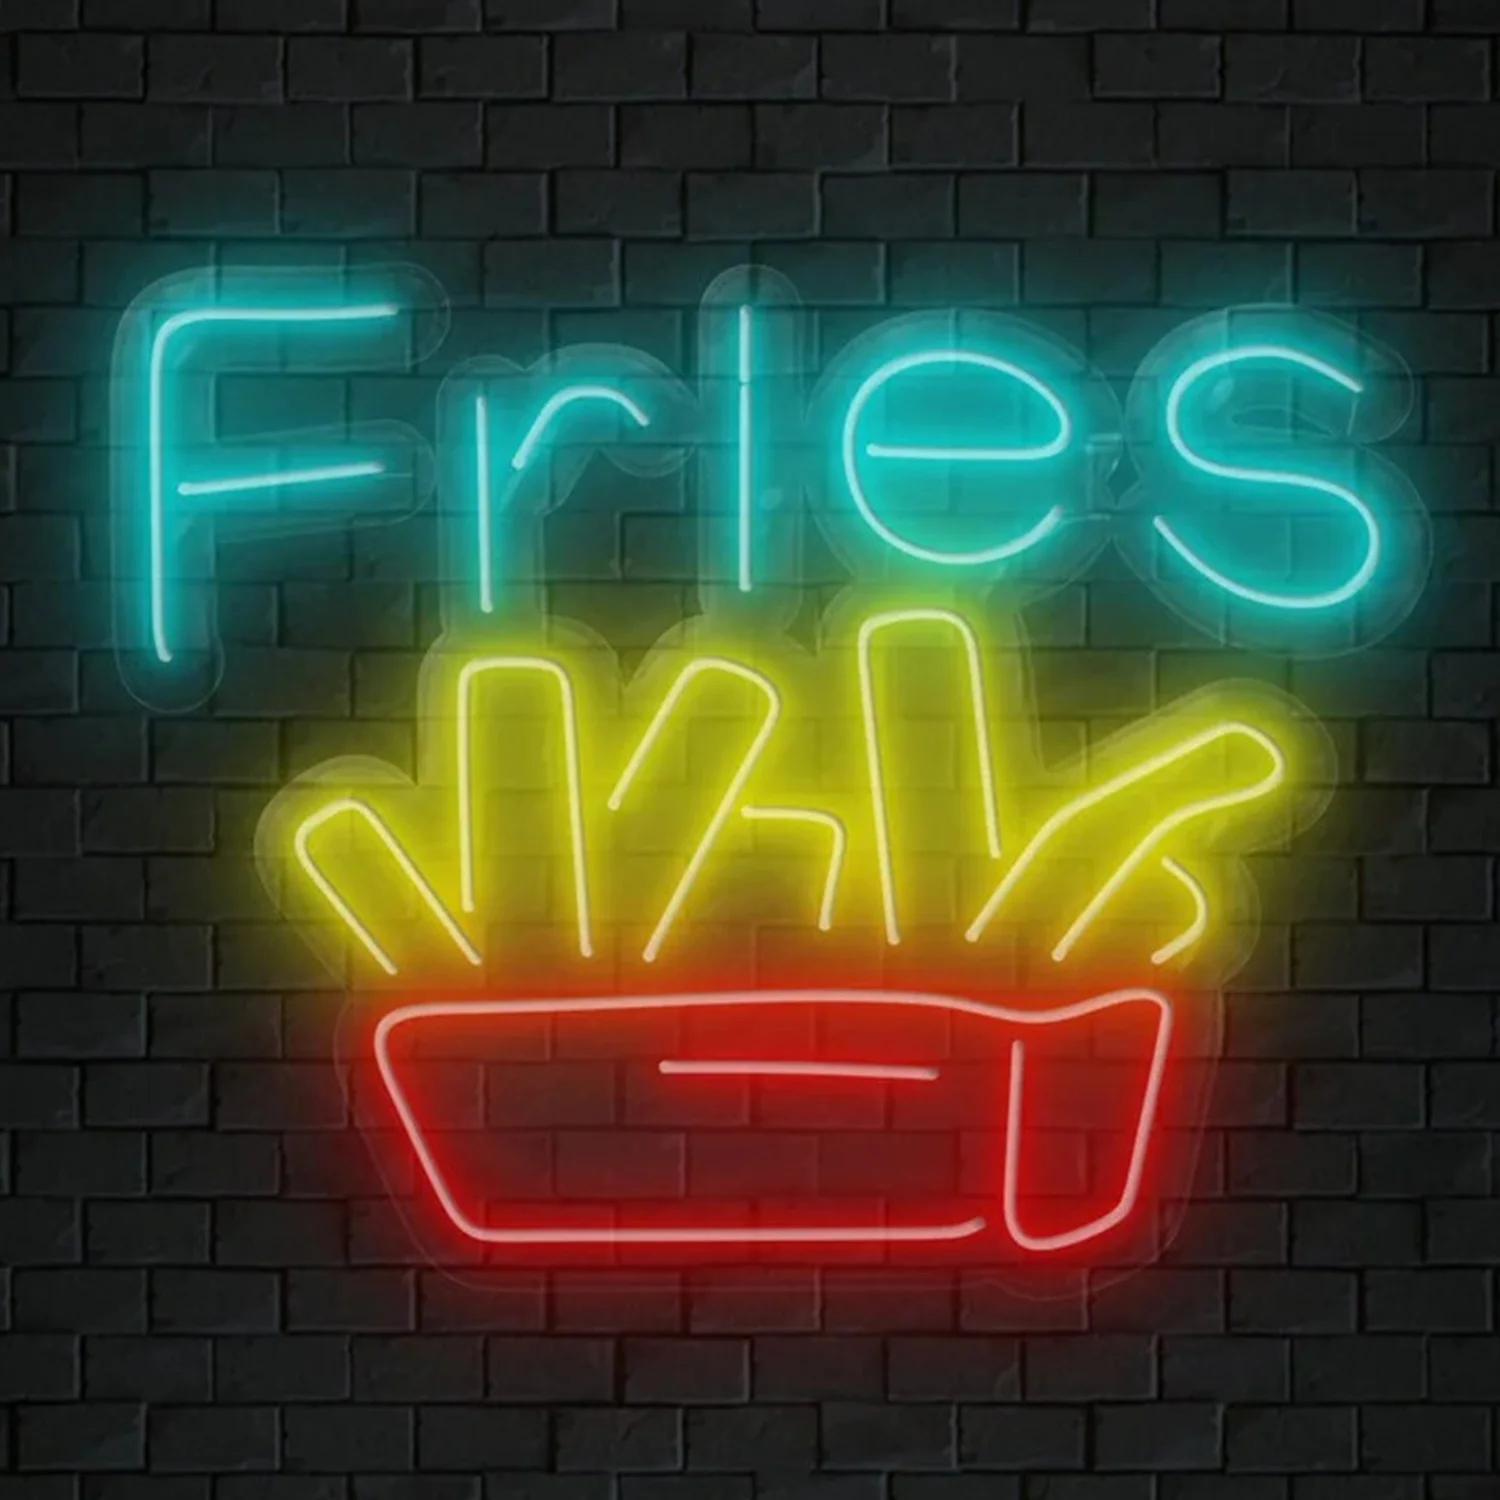 Fried French Fries Neon Signs Led Neon Sign Acrylic Light for Business Wall Art for Bedrooms Kitchen Dining Car Restaurant Party neon sign led light chili tomato eggplant carrot acrylic wall bar party office room bedroom kitchen beautiful decorate